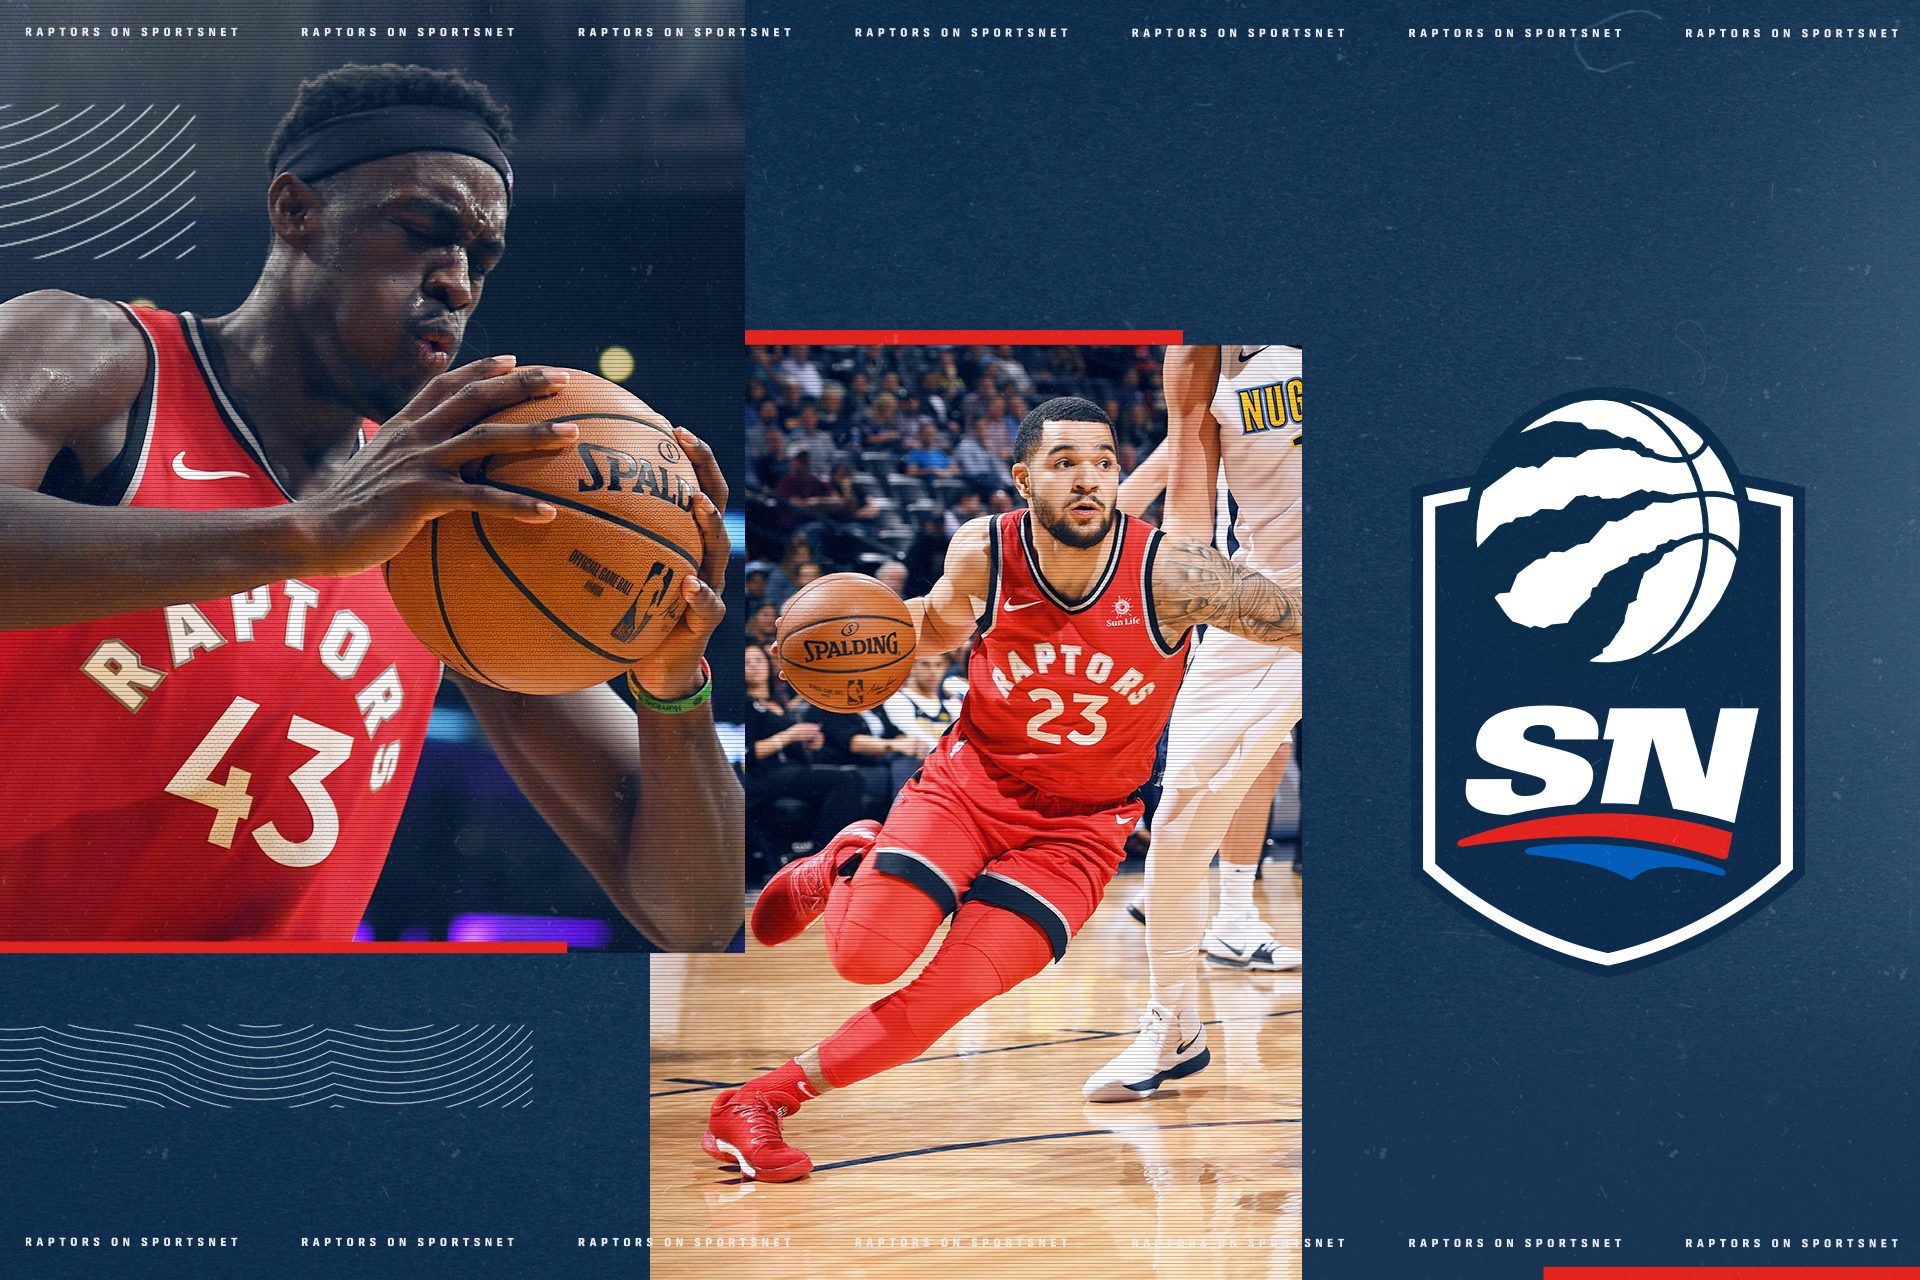 The North Returns Sportsnet Announces 2021-22 Toronto Raptors Broadcast Schedule Rogers Sports and Media